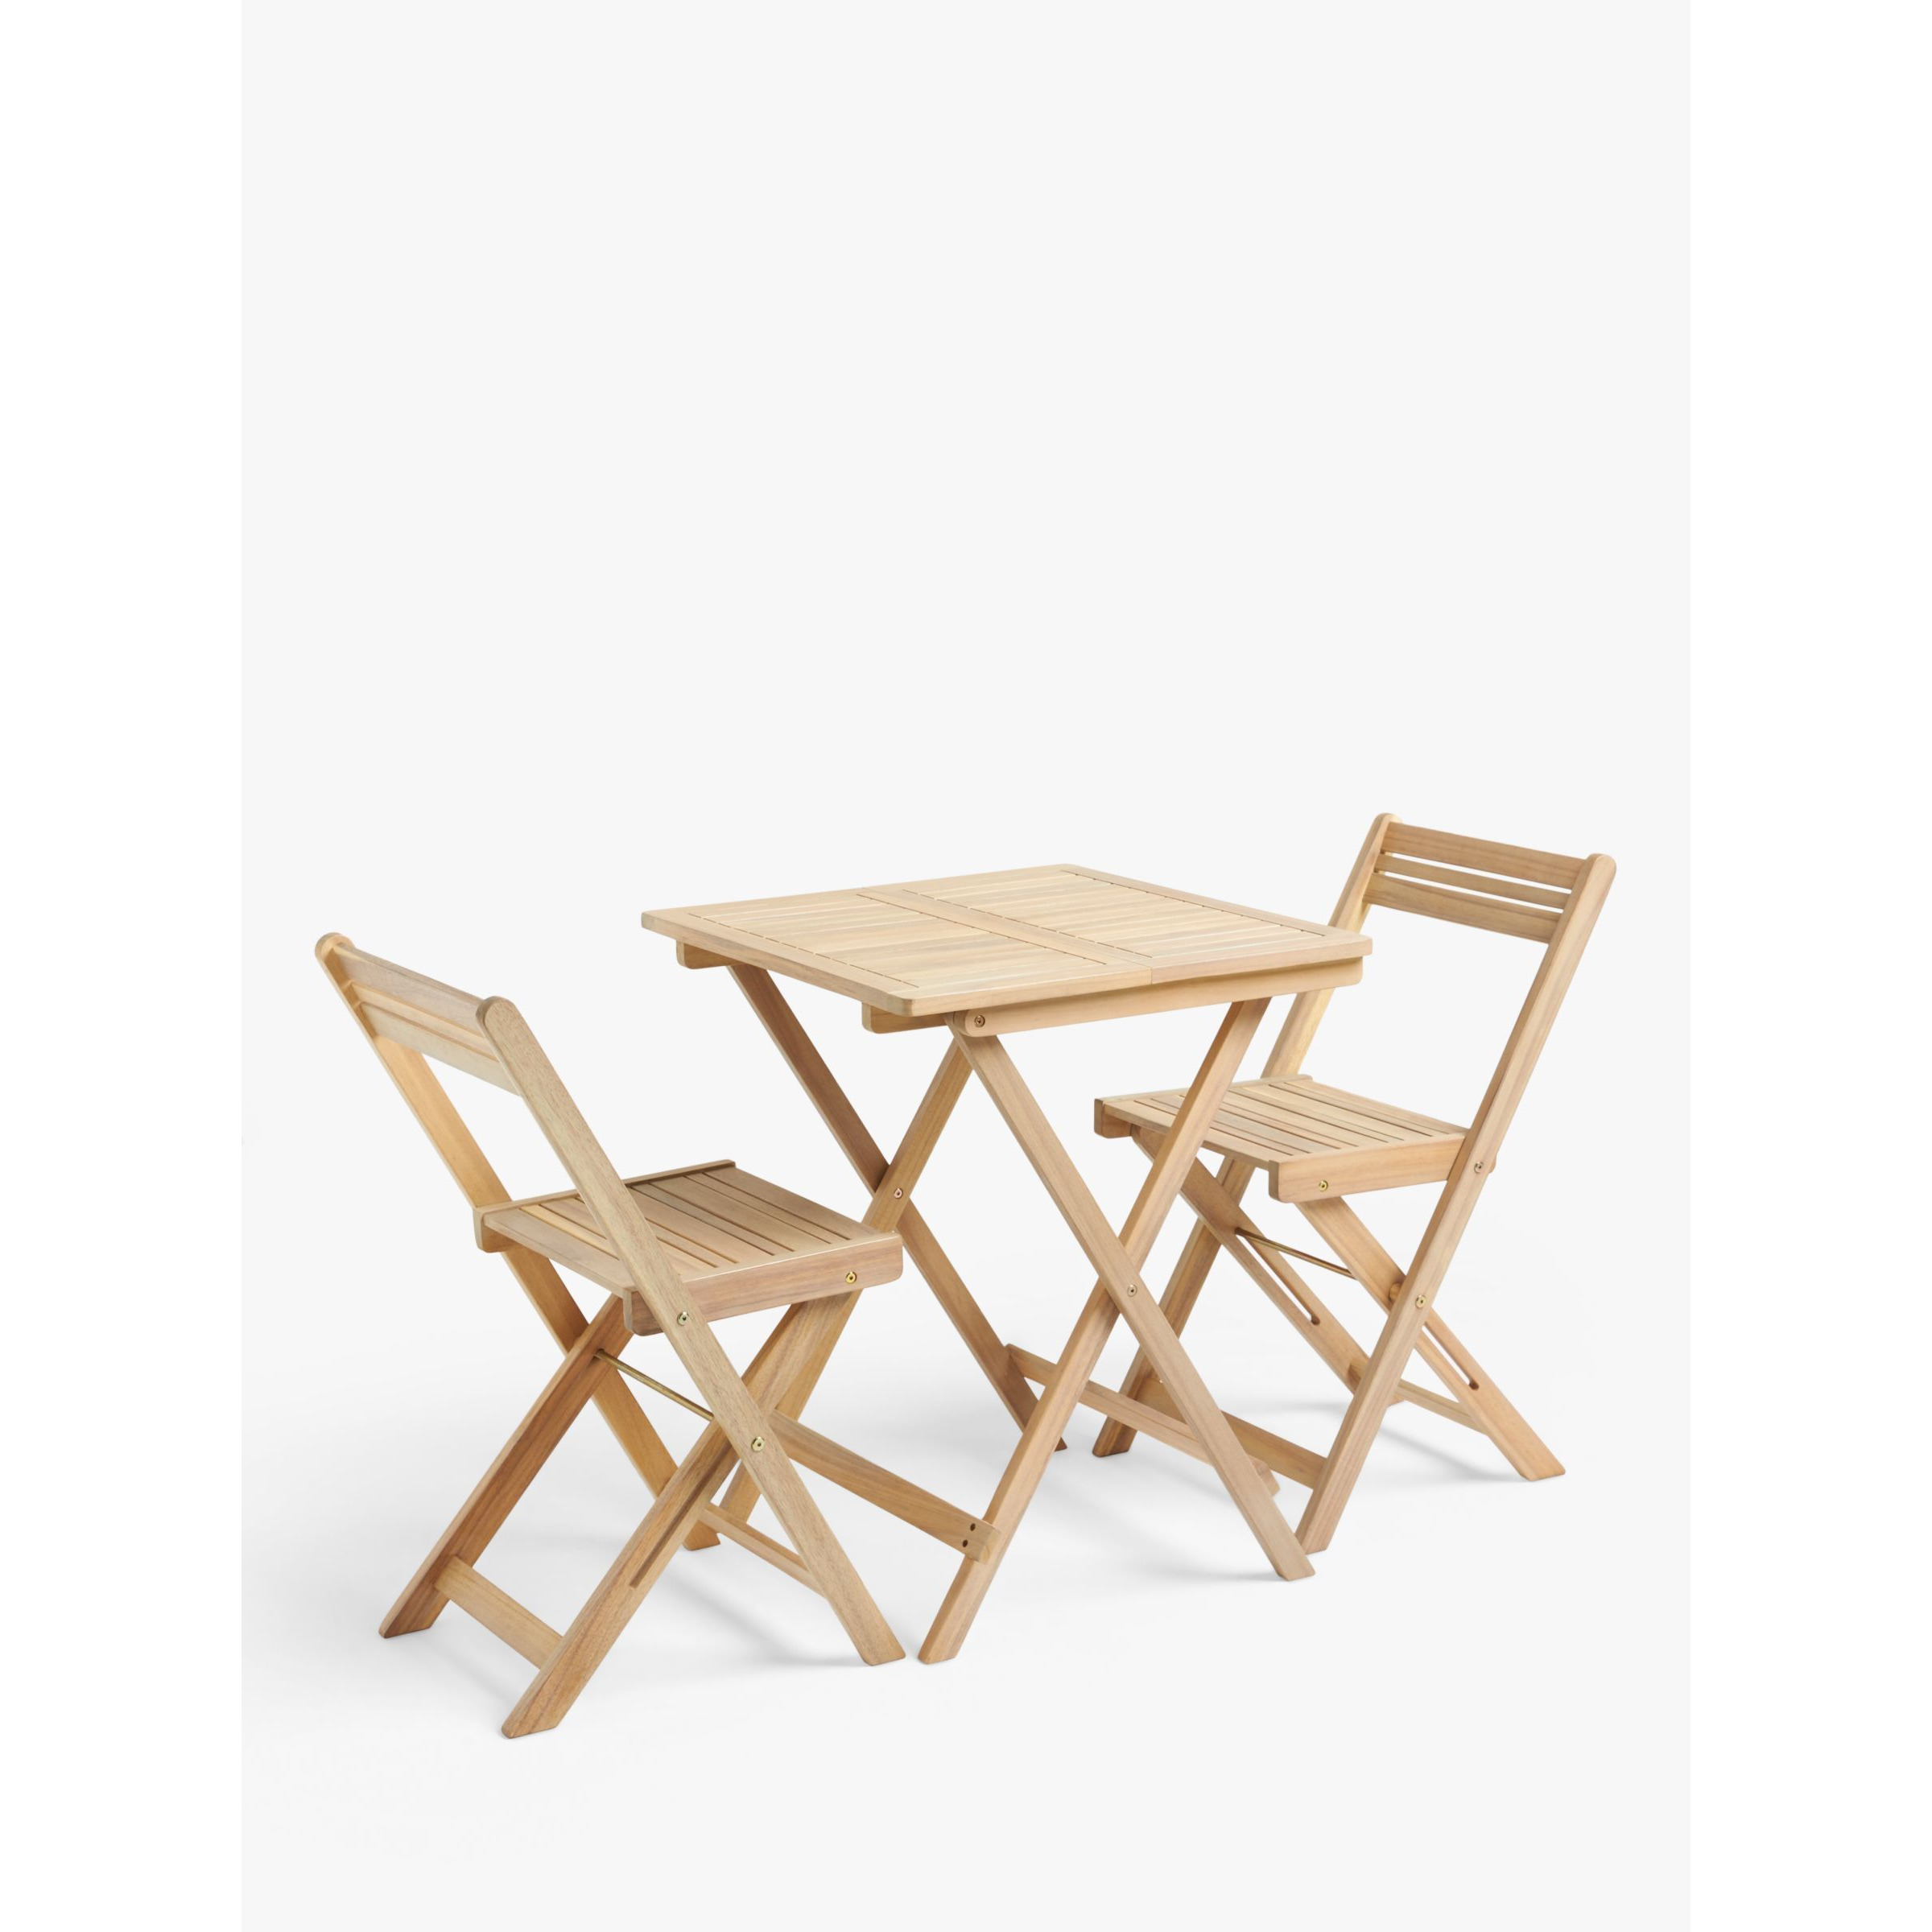 John Lewis ANYDAY Acacia Wood Foldable 2-Seater Garden Bistro Table & Chairs Set, Natural - image 1